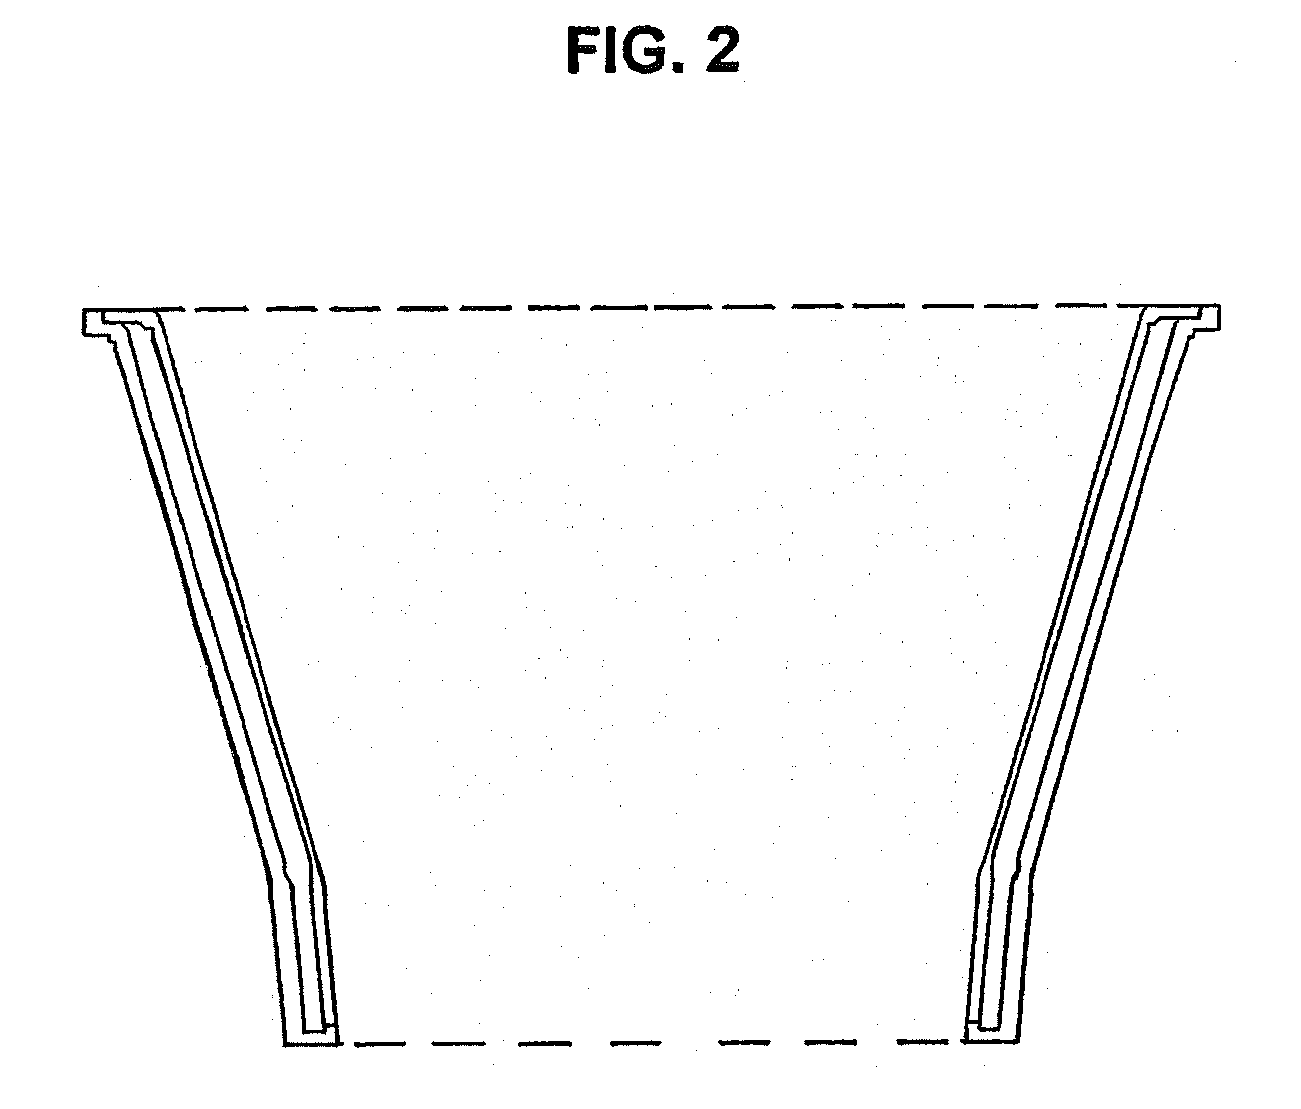 Device and process for growing ga-doped single silicon crystals suitable for making solar cells